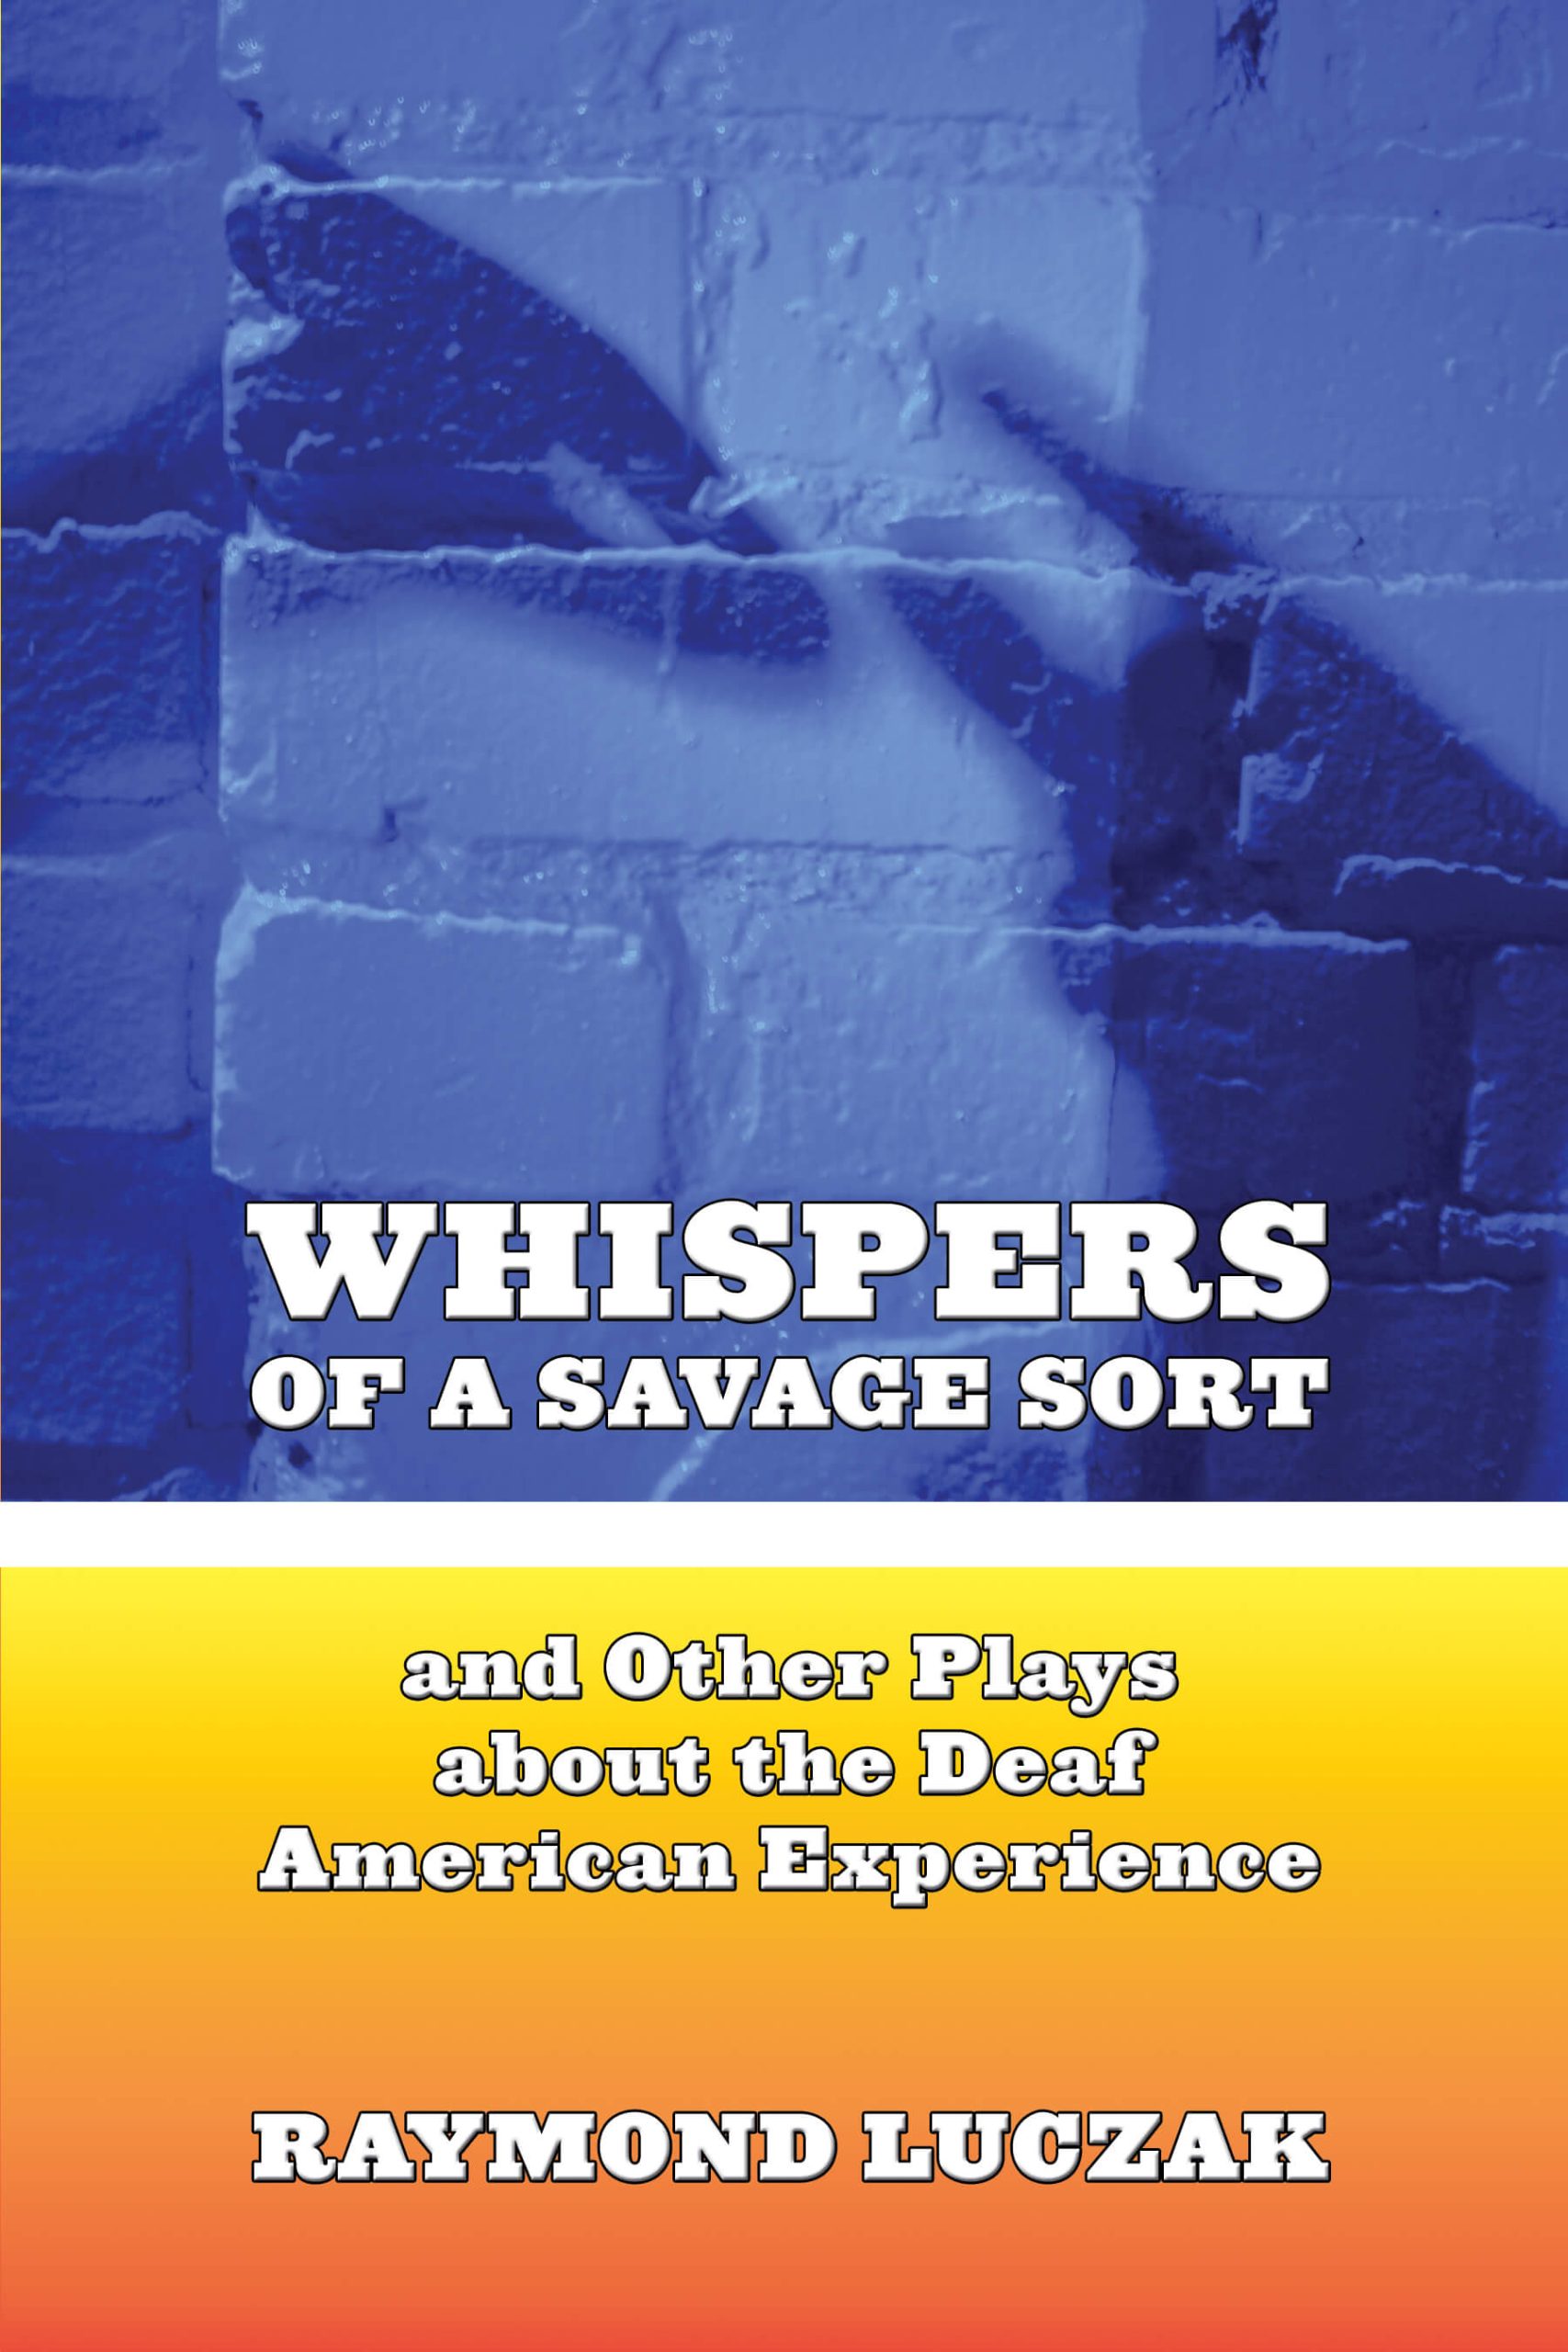 Whispers of a Savage Sort and Other Plays about the Deaf American Experience